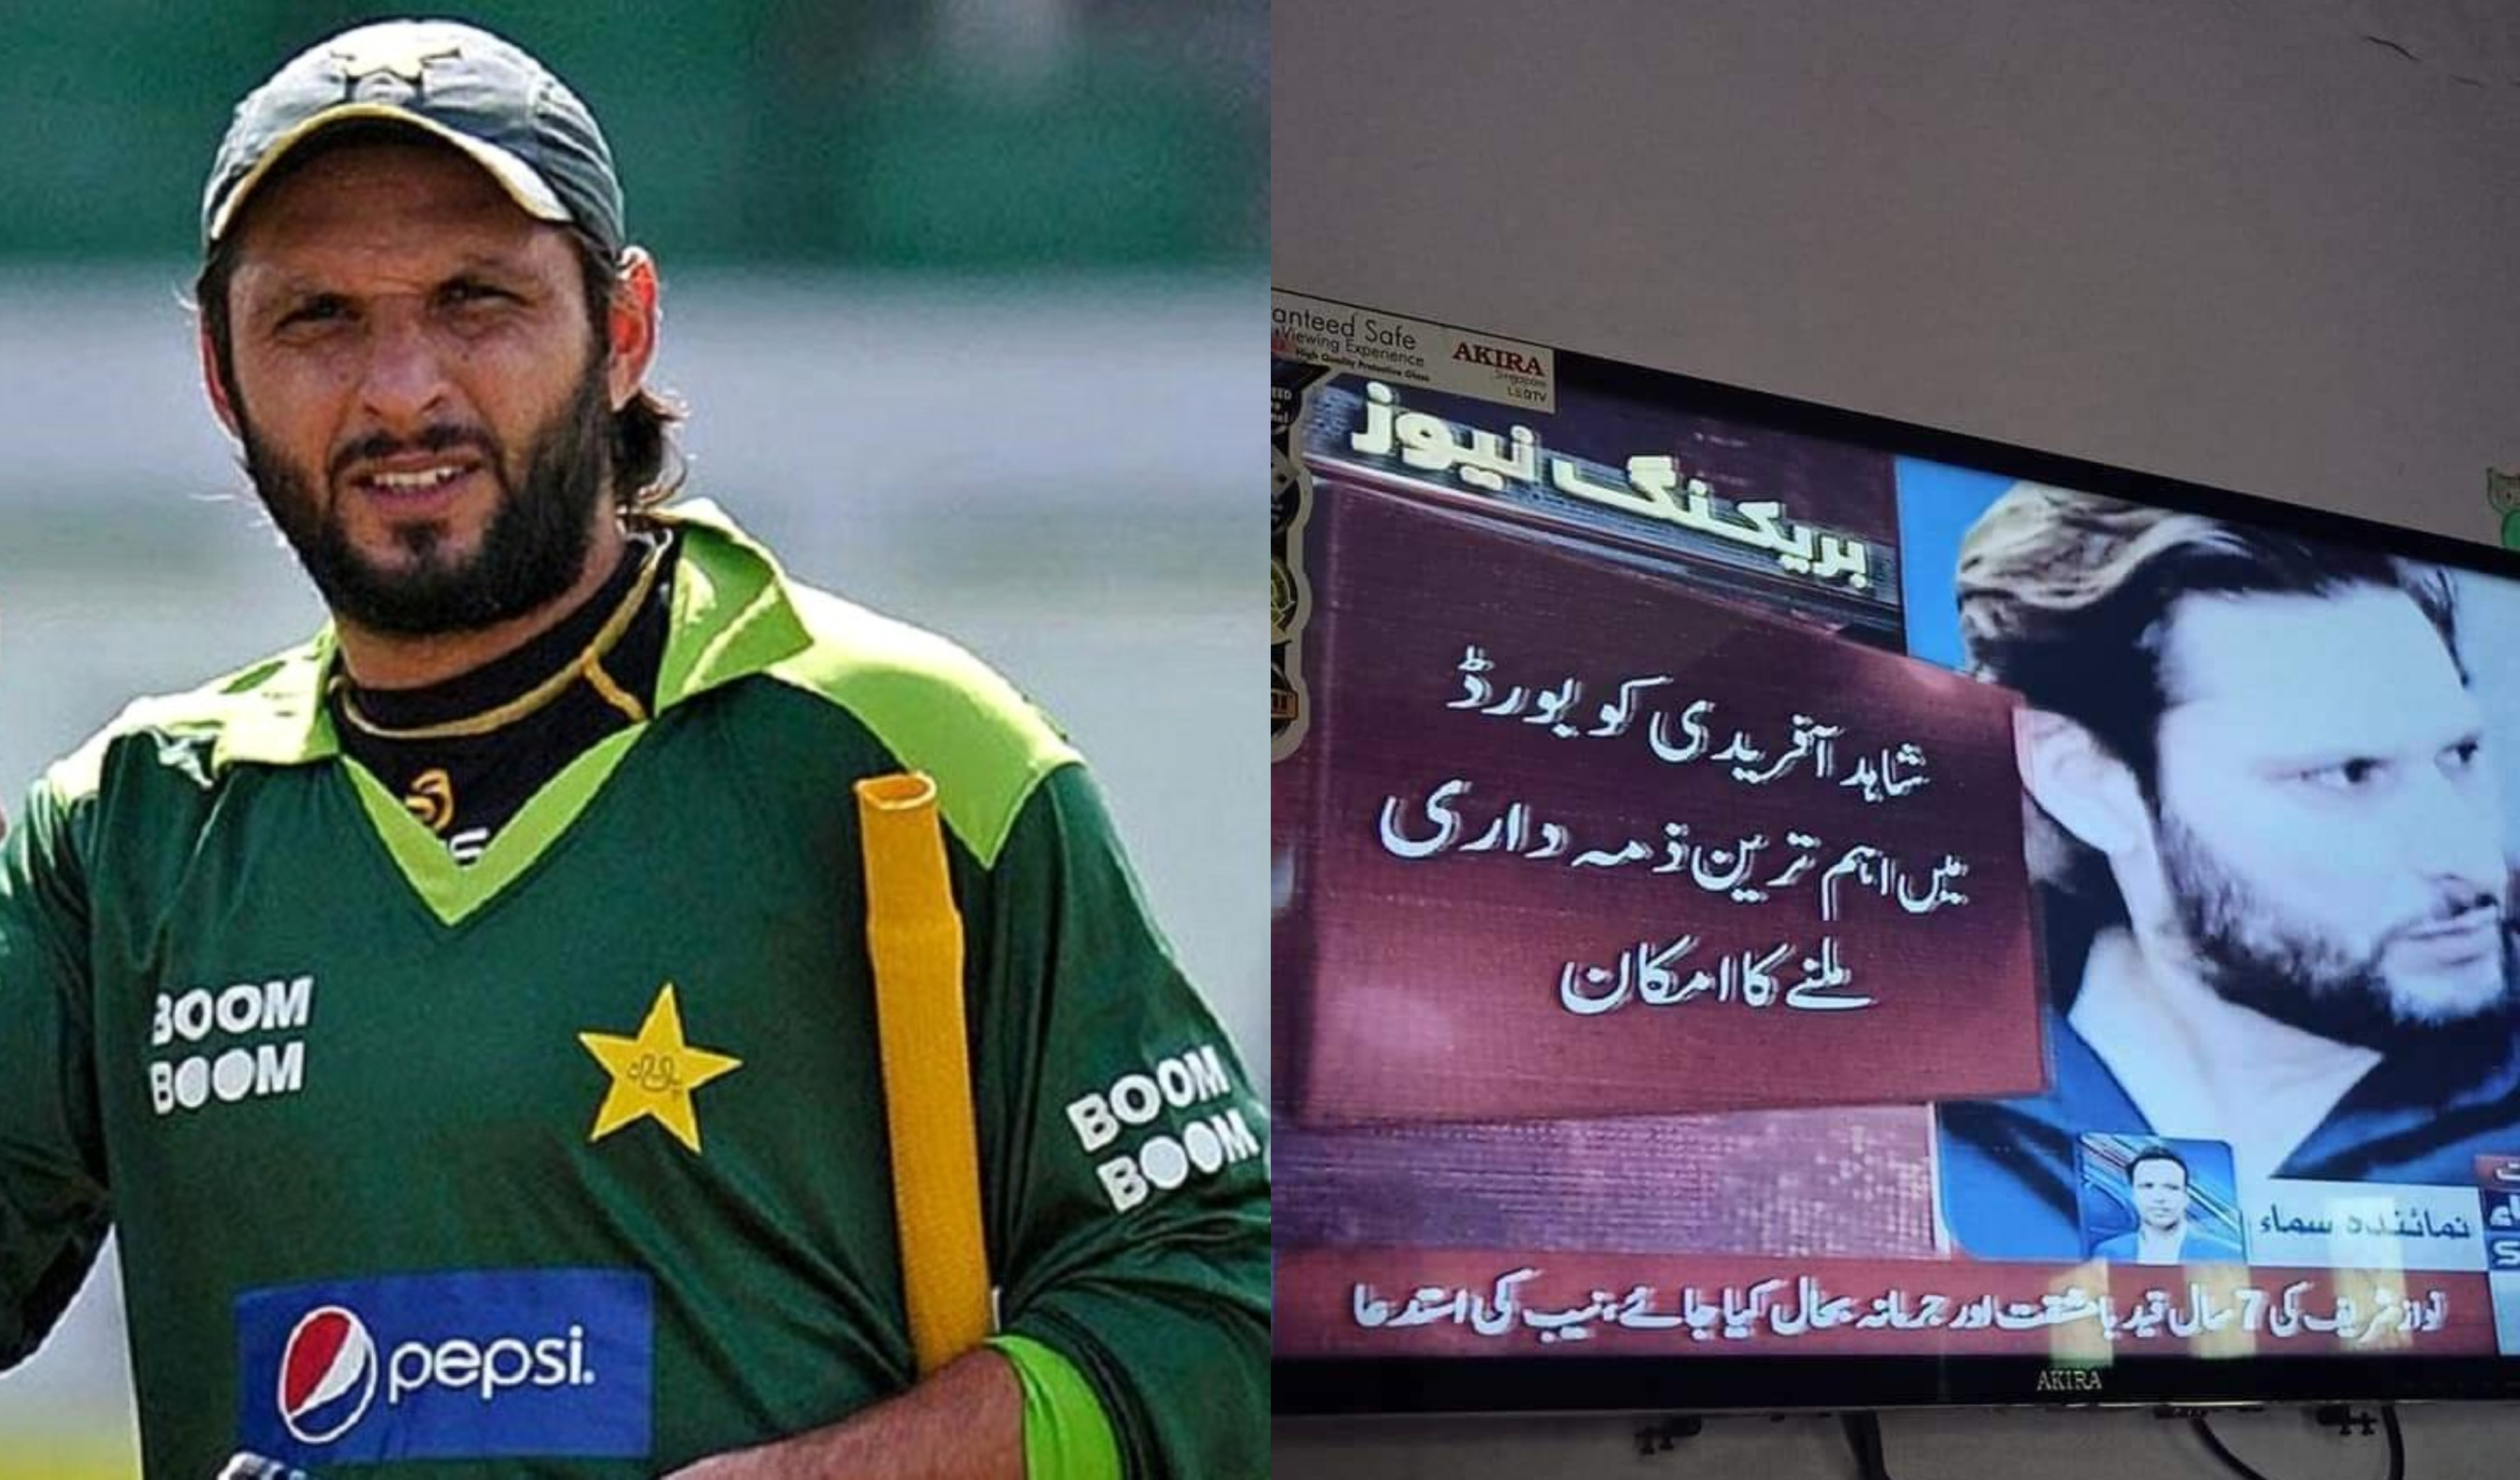 The big news is coming: Shahid Afridi to occupy some post in PCB: Sources